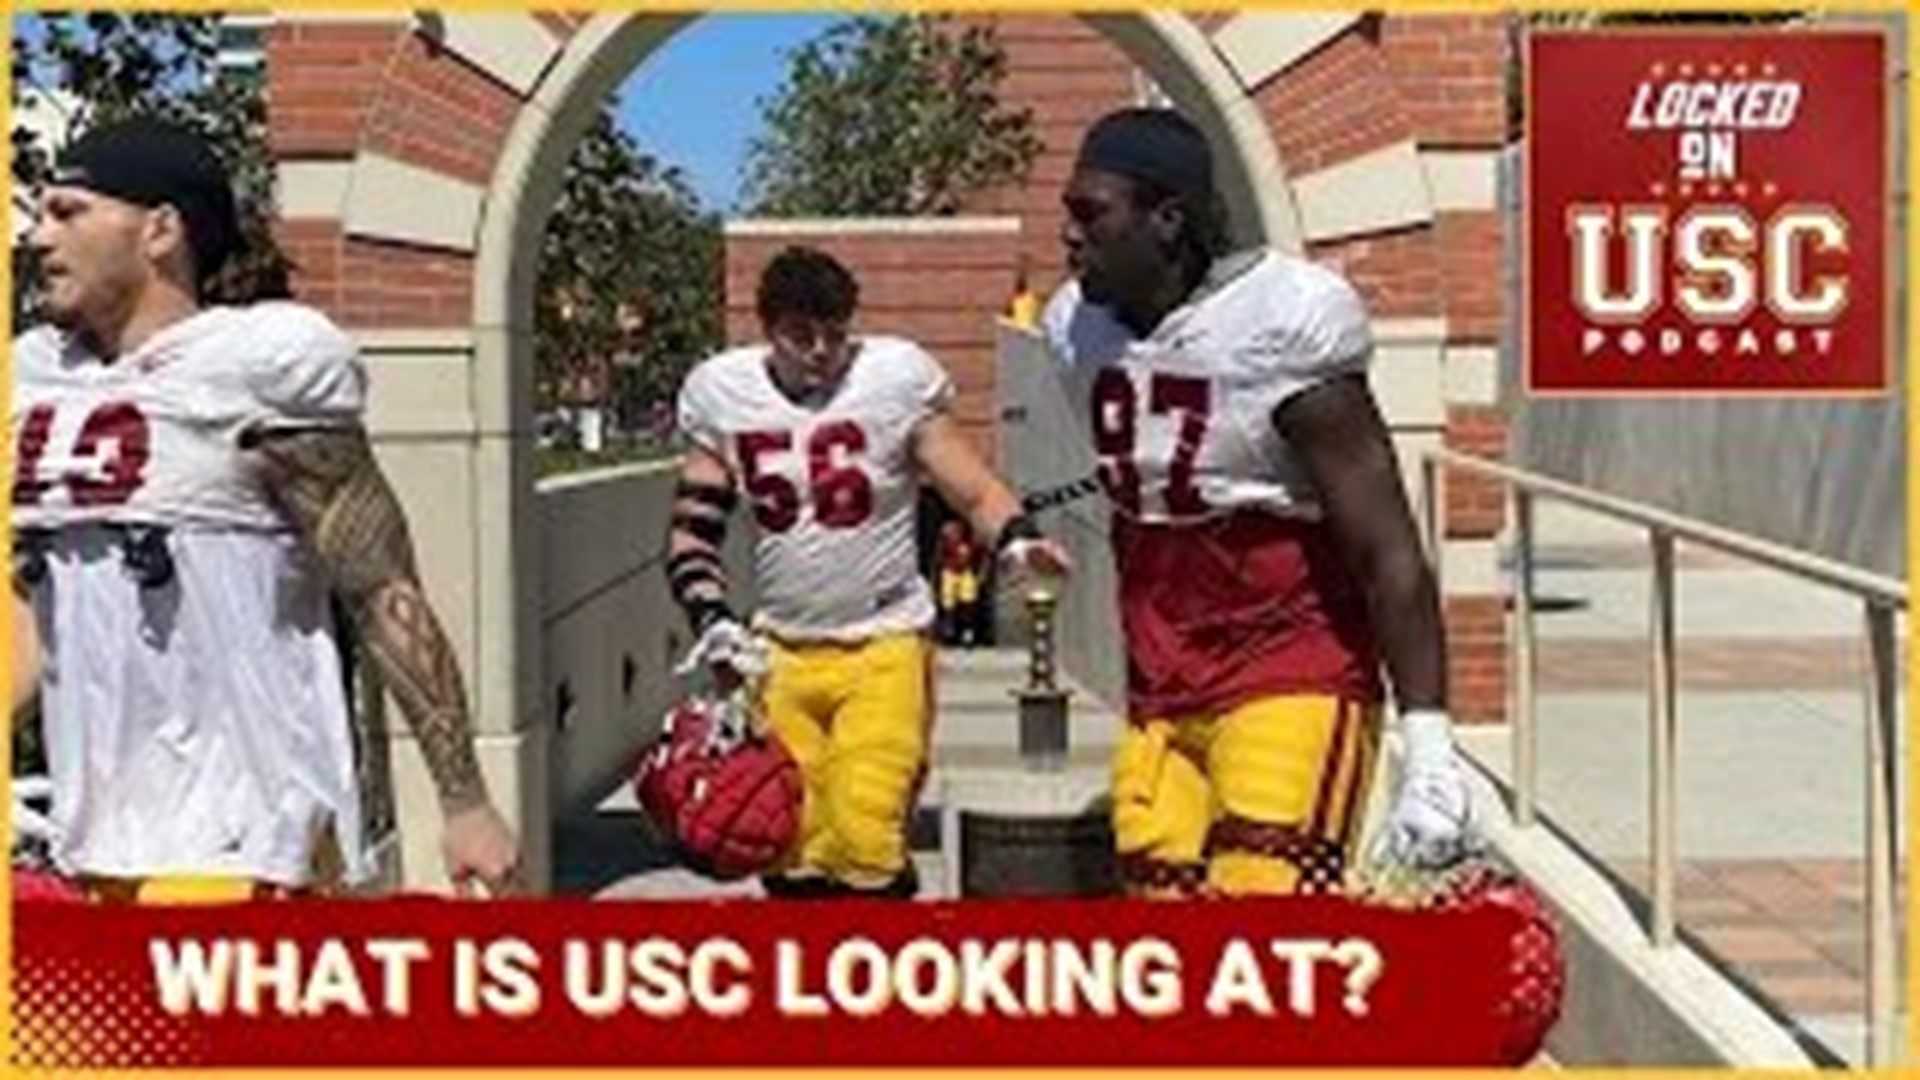 USC's coaching staff has much to evaluate on Saturday when the Trojans play their spring football game. I'll tell you what I'll look at on both sides of the ball.